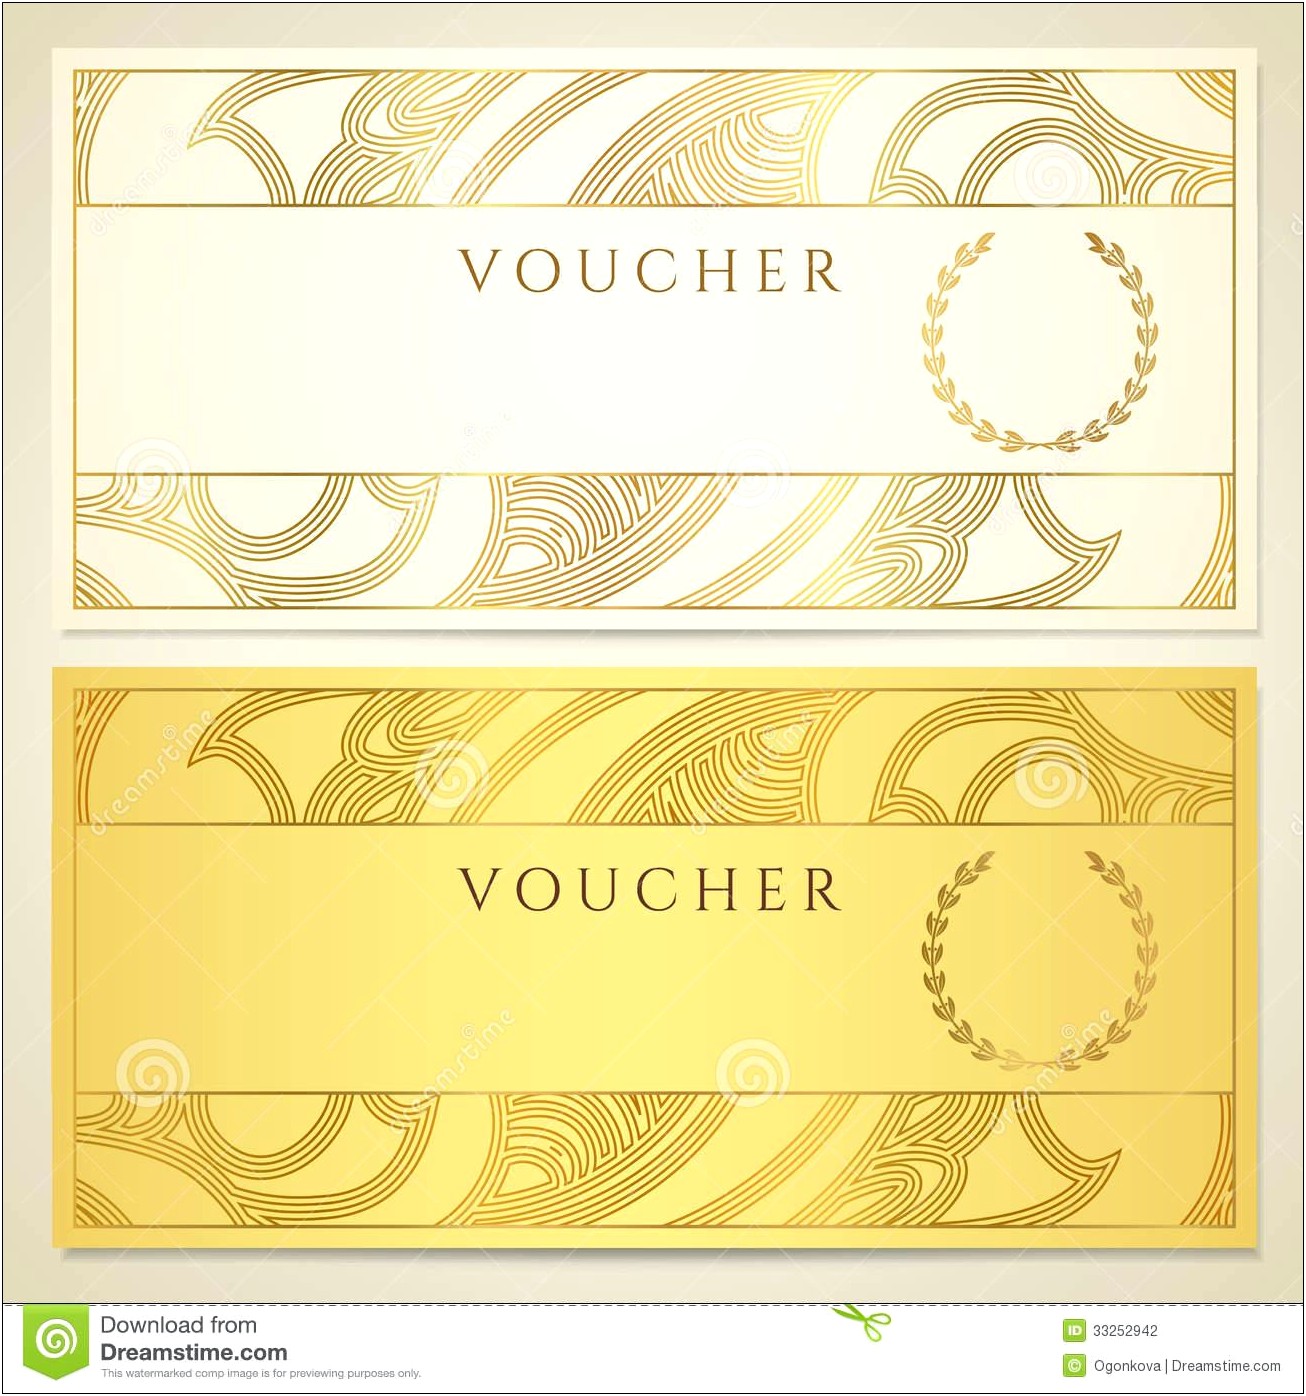 Free Online Gift Certificate Maker Template